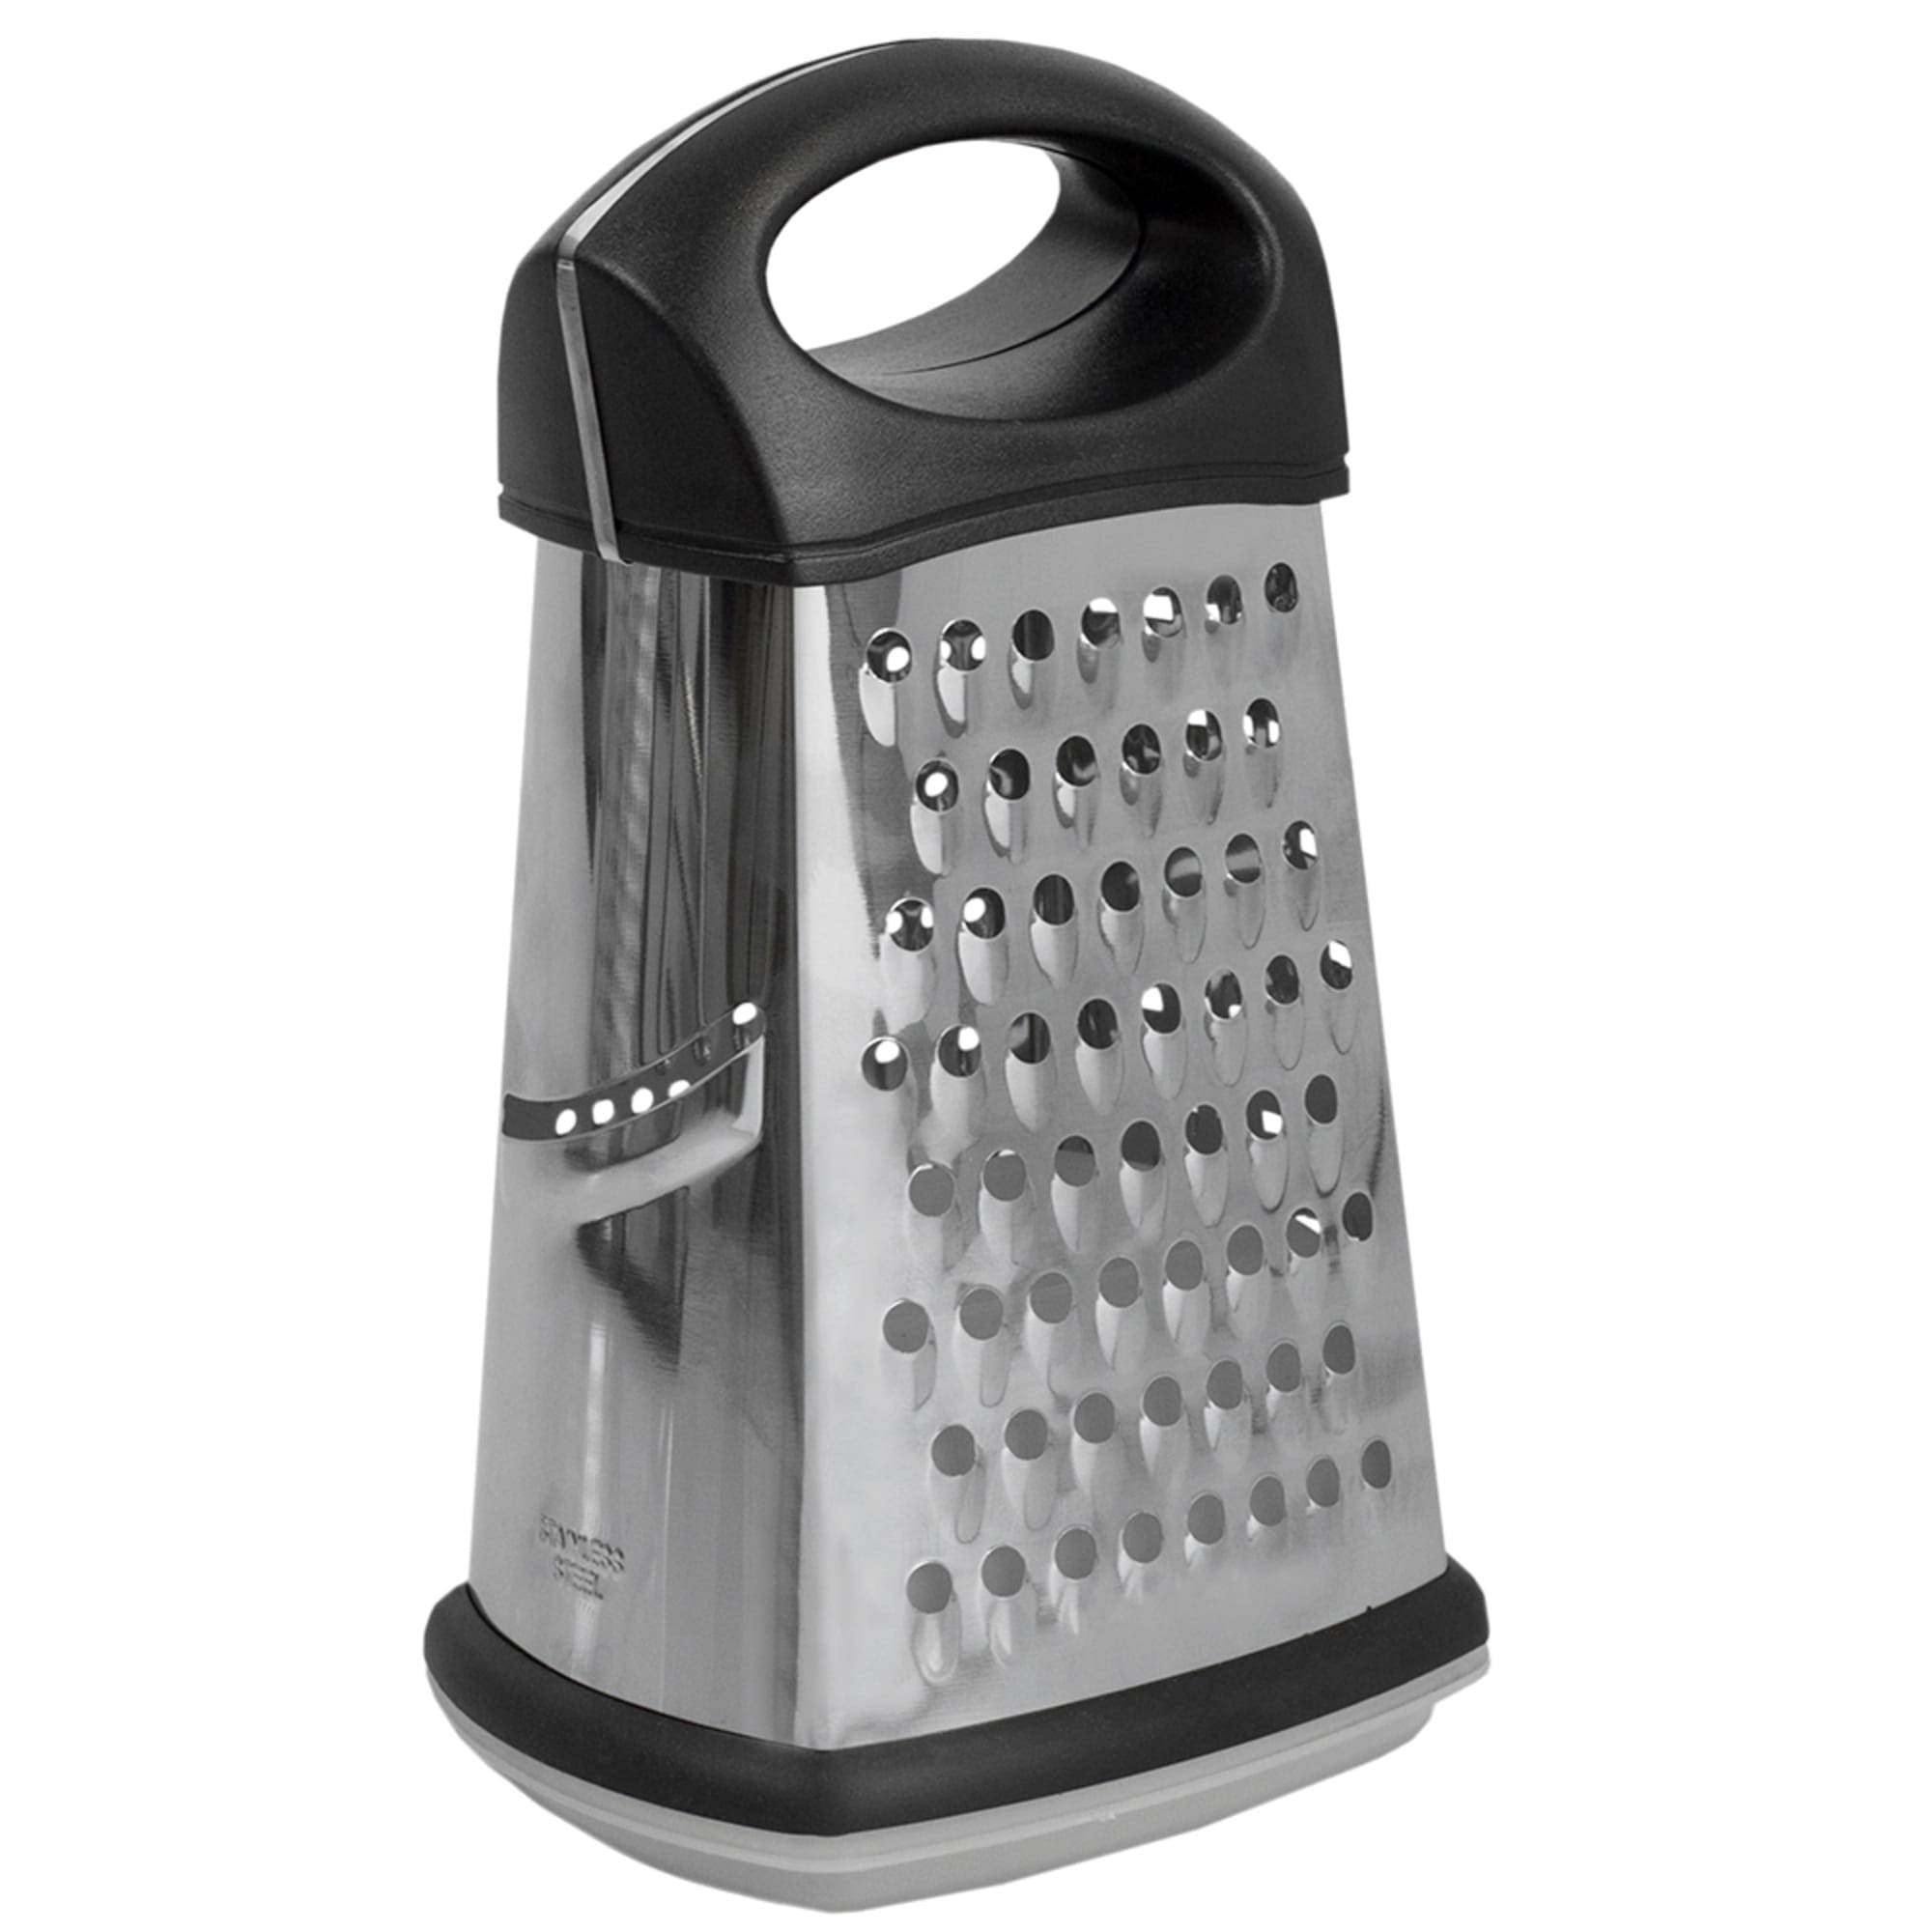 Crystalia Cheese Grater with Glass Storage Container Sprinkler